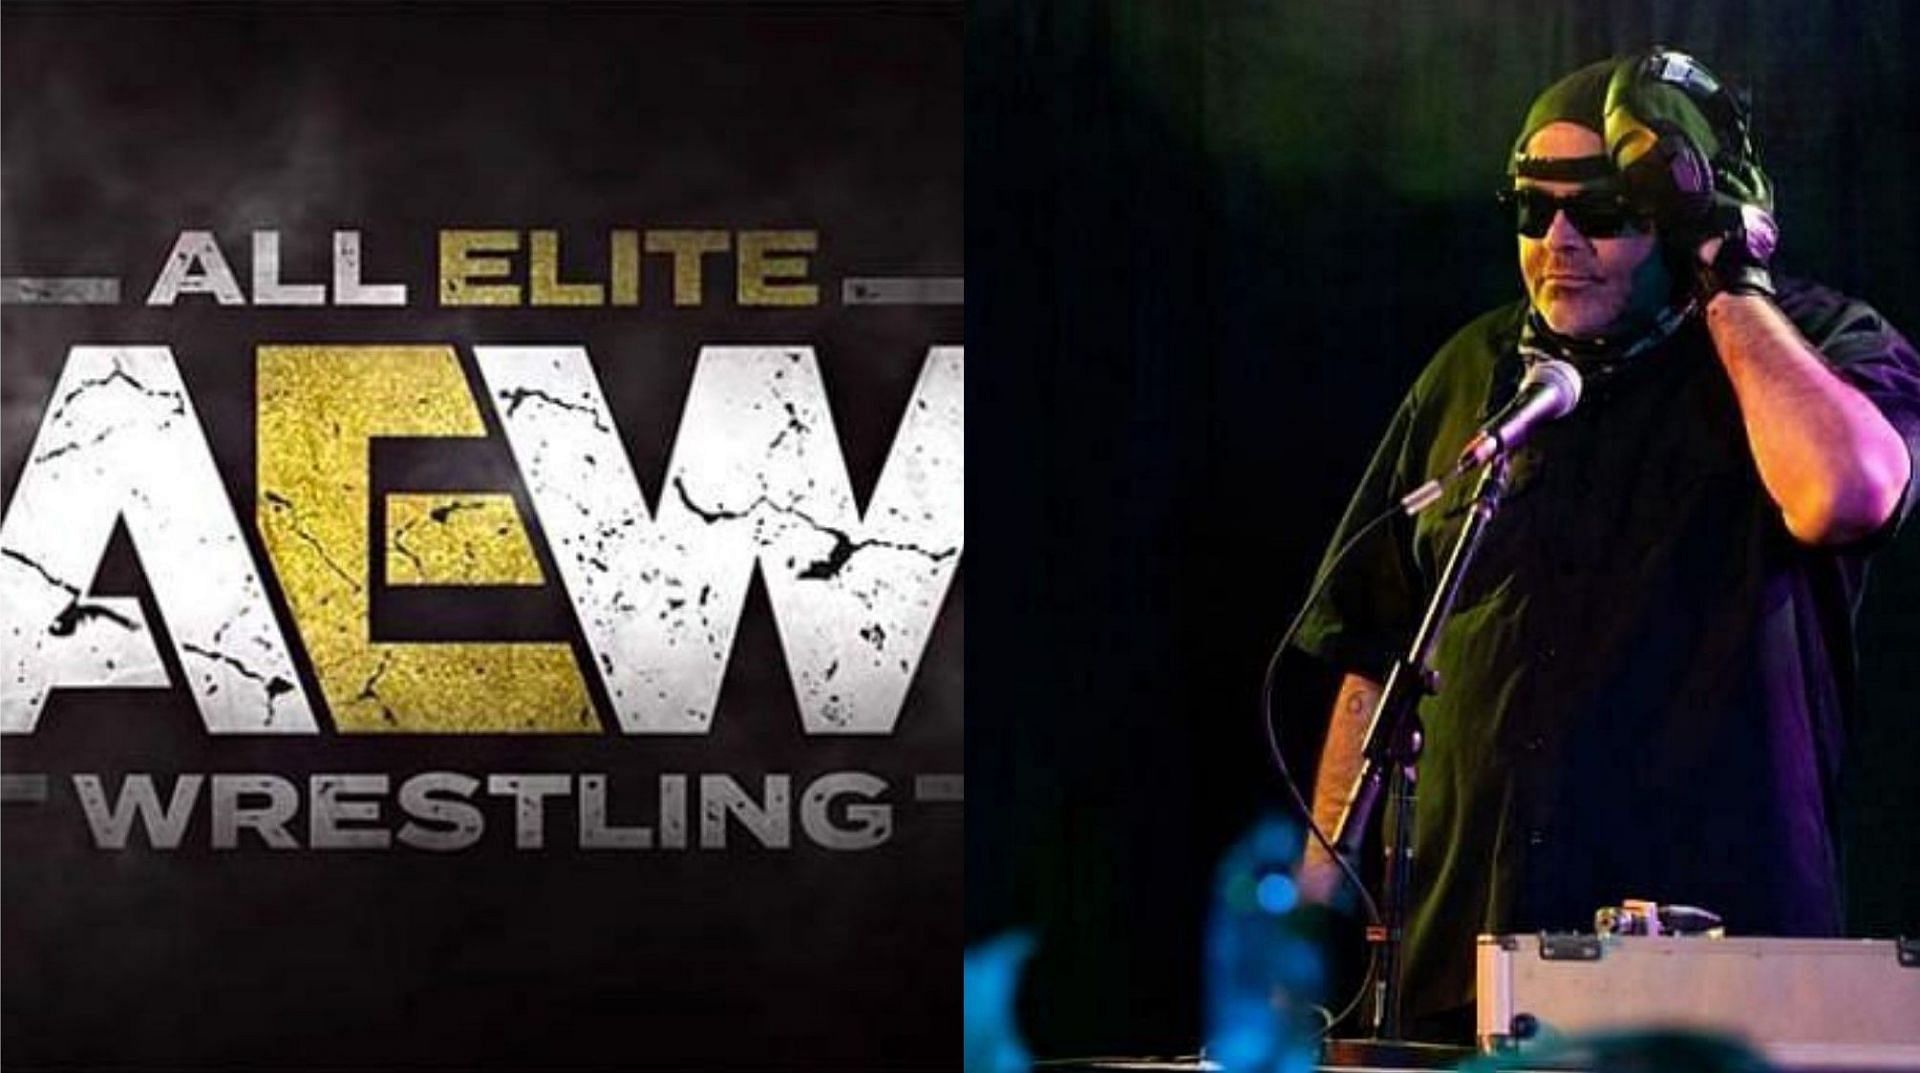 WCW legend Konnan predicts the endgame of current AEW storyline involving former WWE Superstar